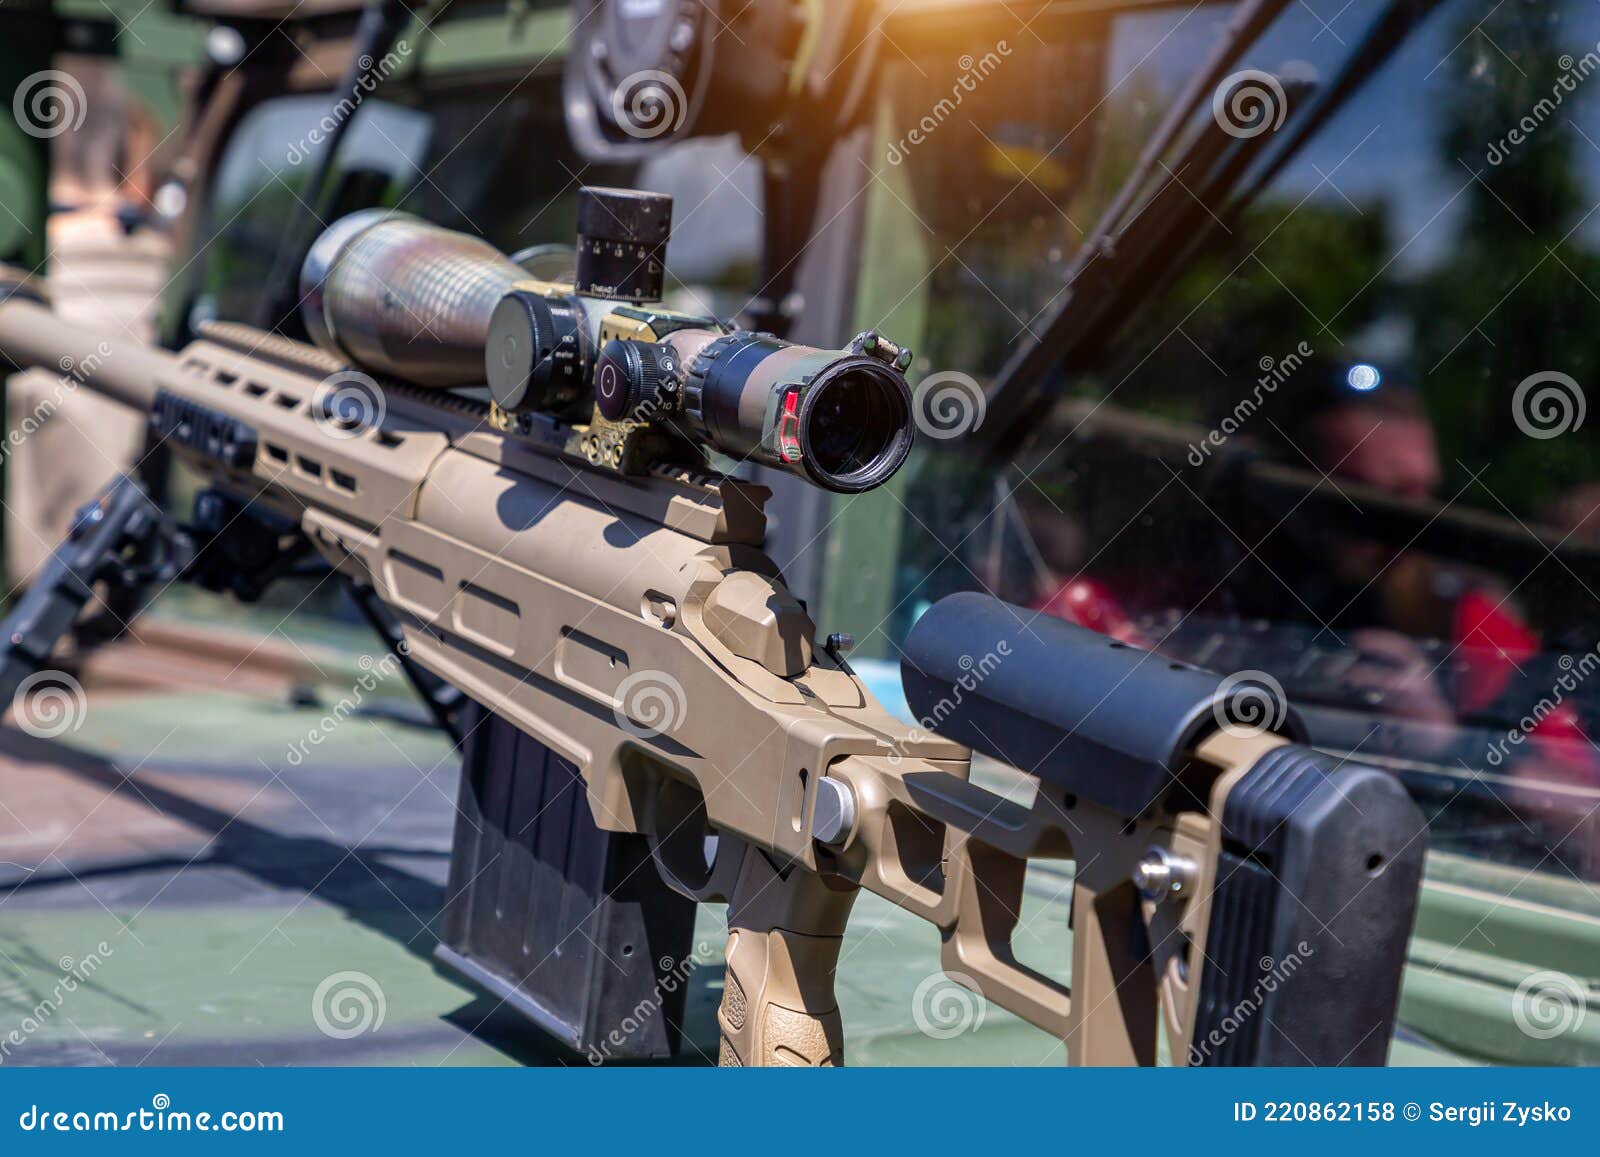 sniper rifle with a telescopic sight for long range shooting in war